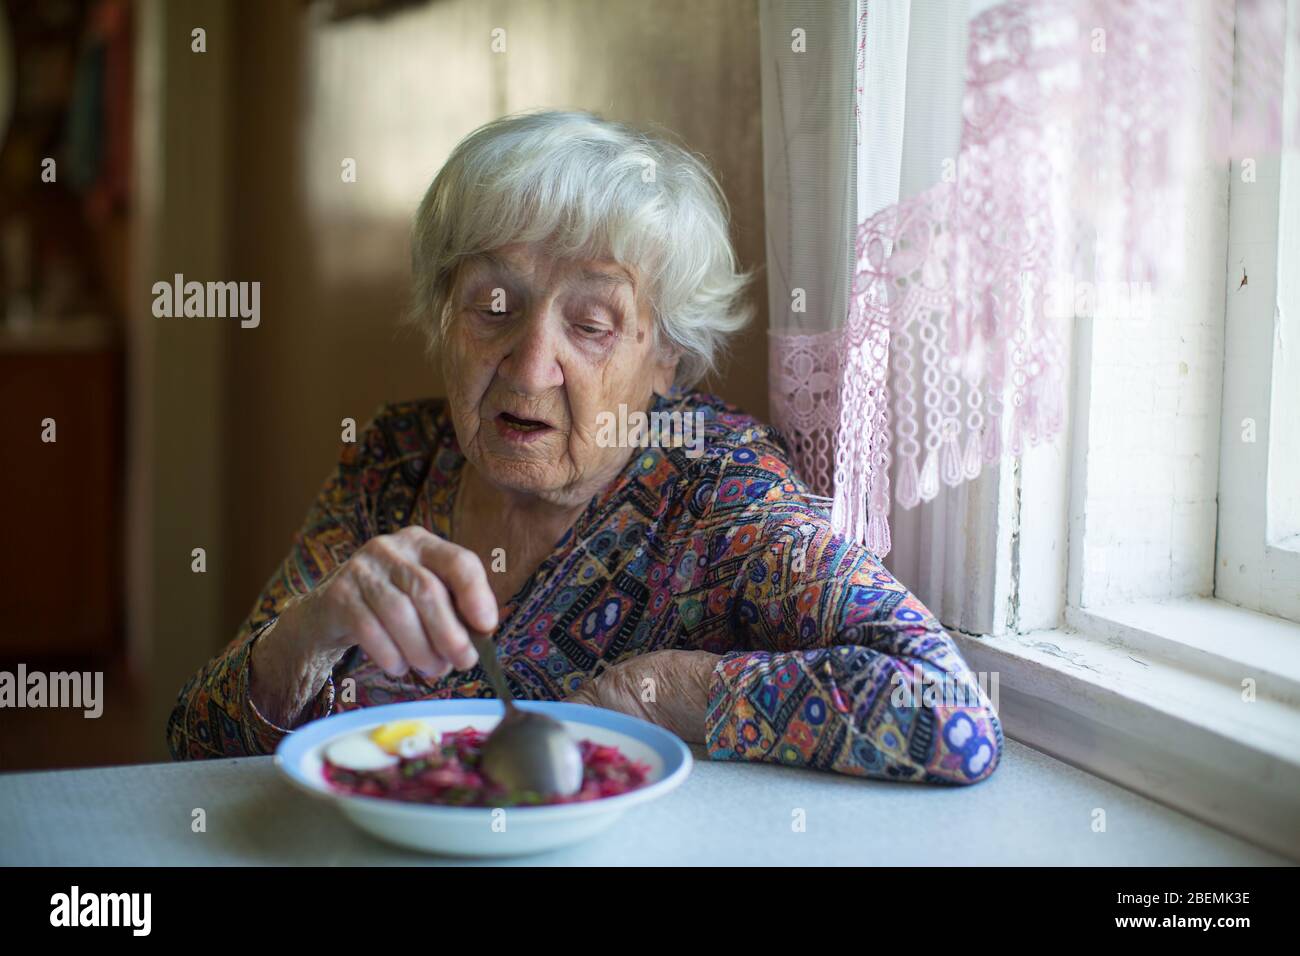 An Old woman eating soup sitting at a table in the her house. Stock Photo